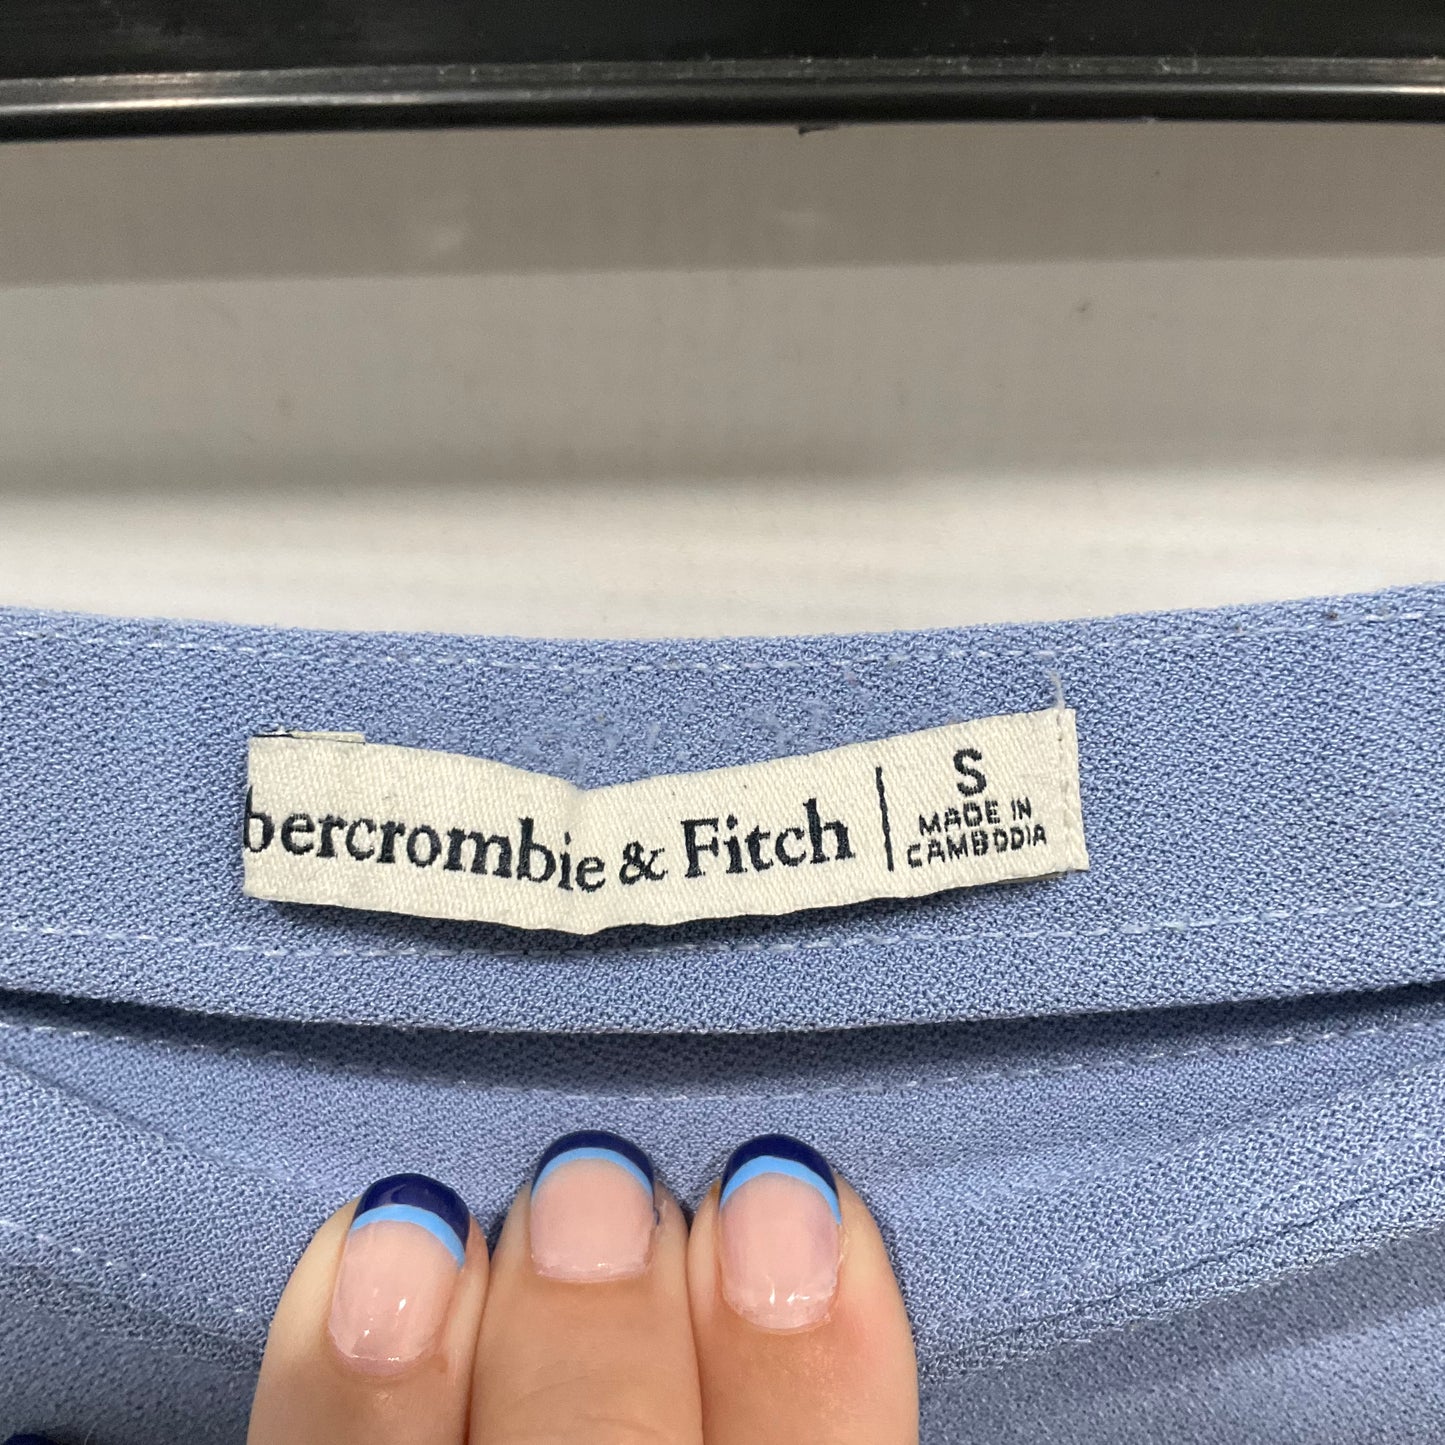 Skirt Midi By Abercrombie And Fitch  Size: S